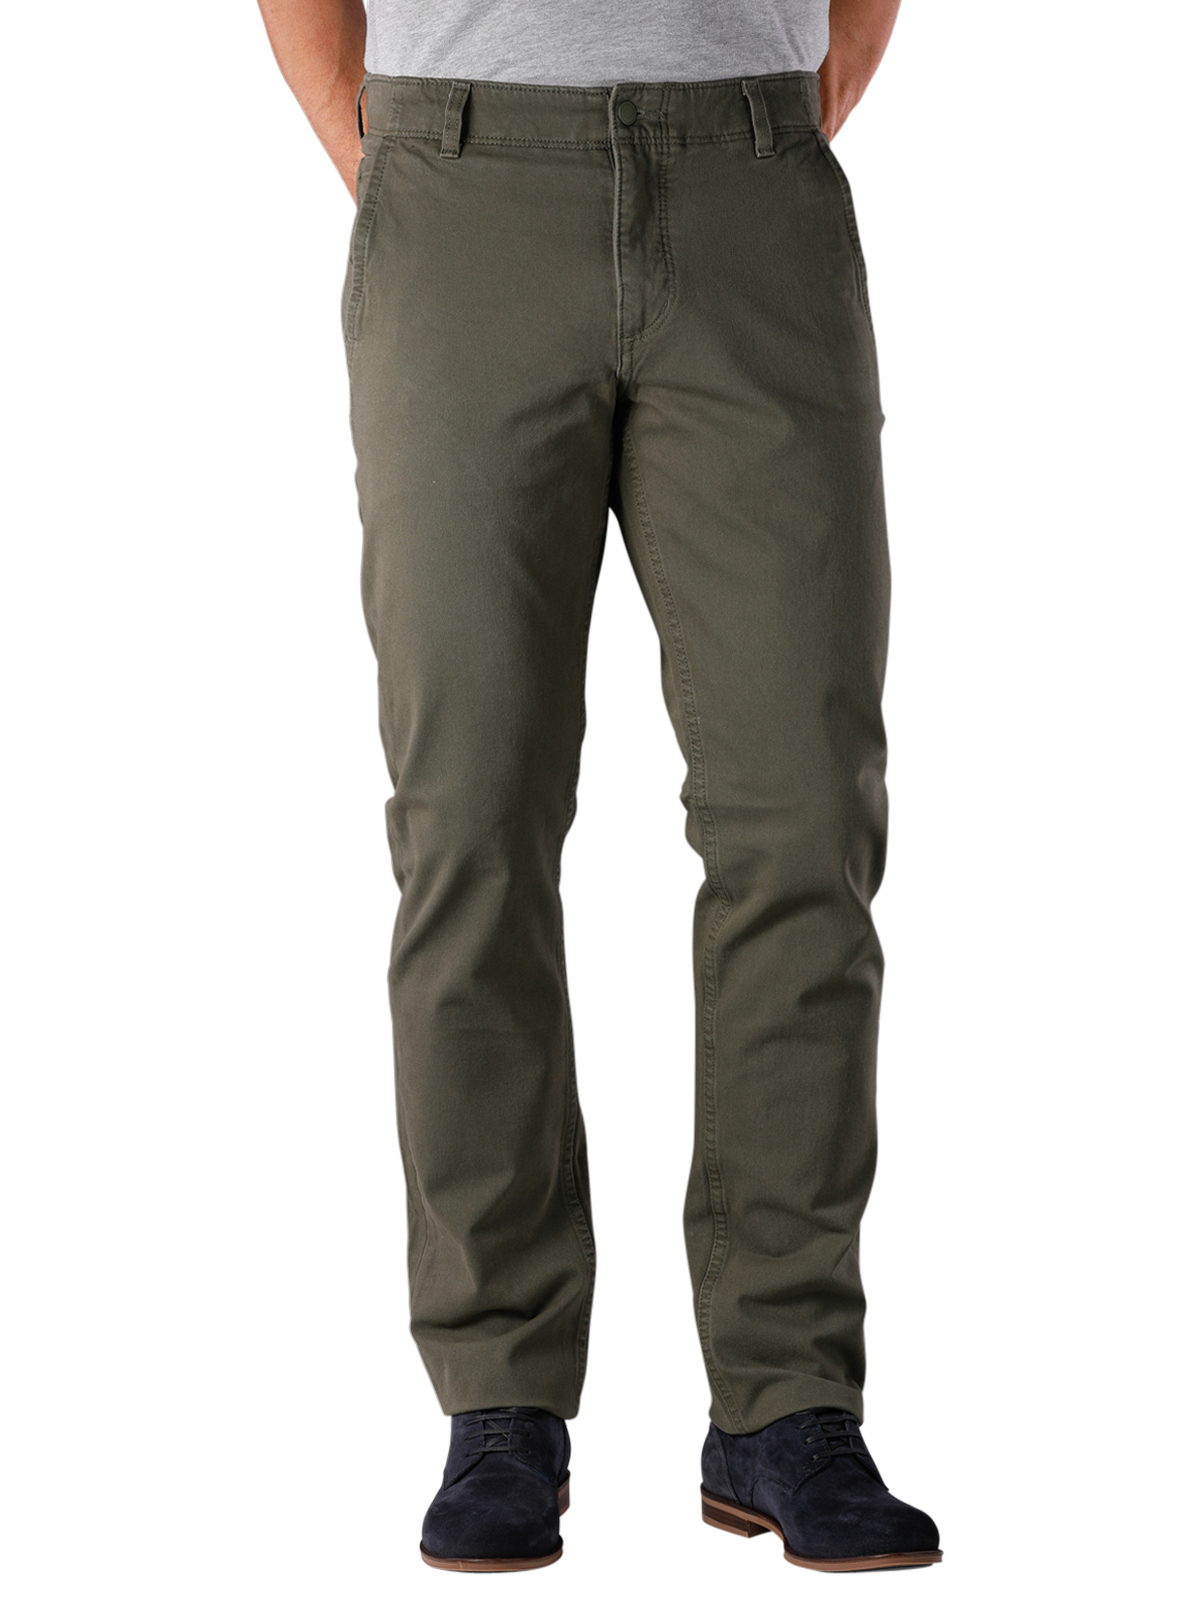 Niet modieus Controle Discriminerend Dockers Alpha Khaki 360 Pant Tapered dockers olive Dockers Men's Pant |  Free Shipping on BEBASIC.CH - SIMPLY LOOK GOOD